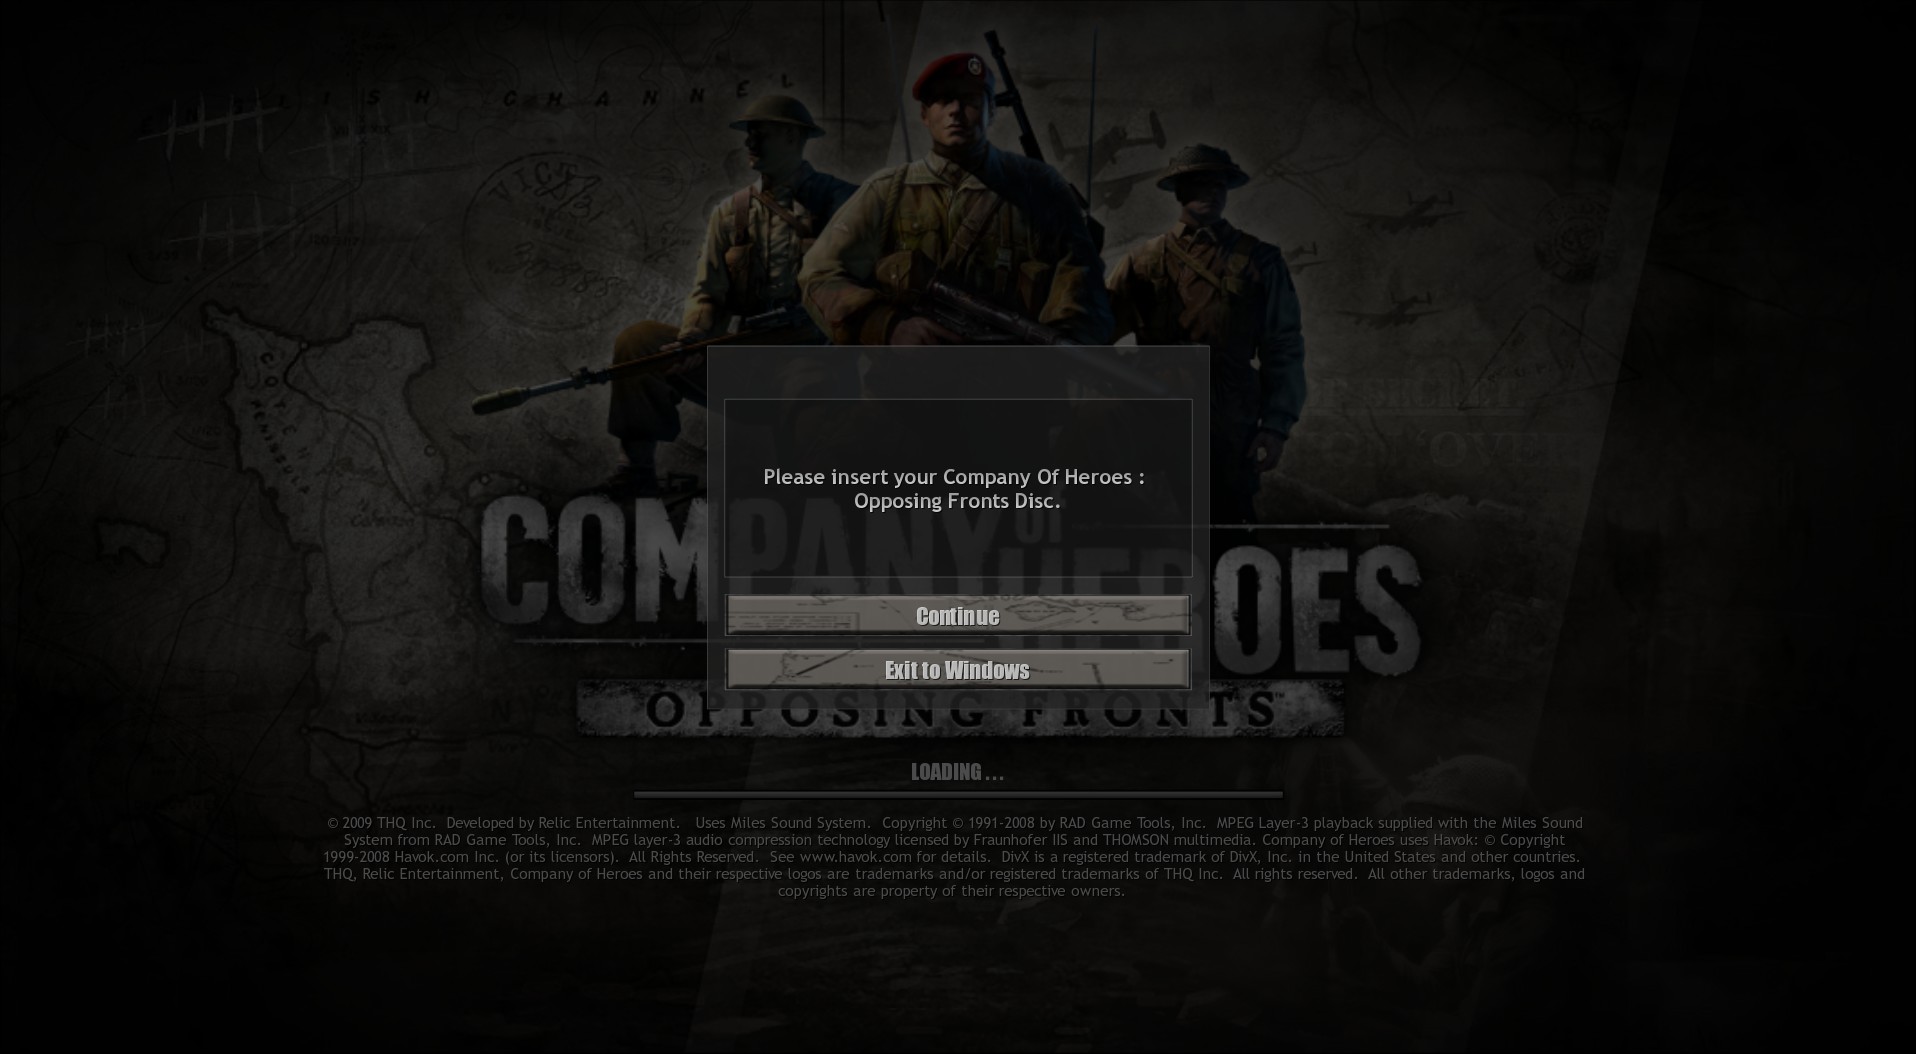 steam company of heroes vs legacy edition